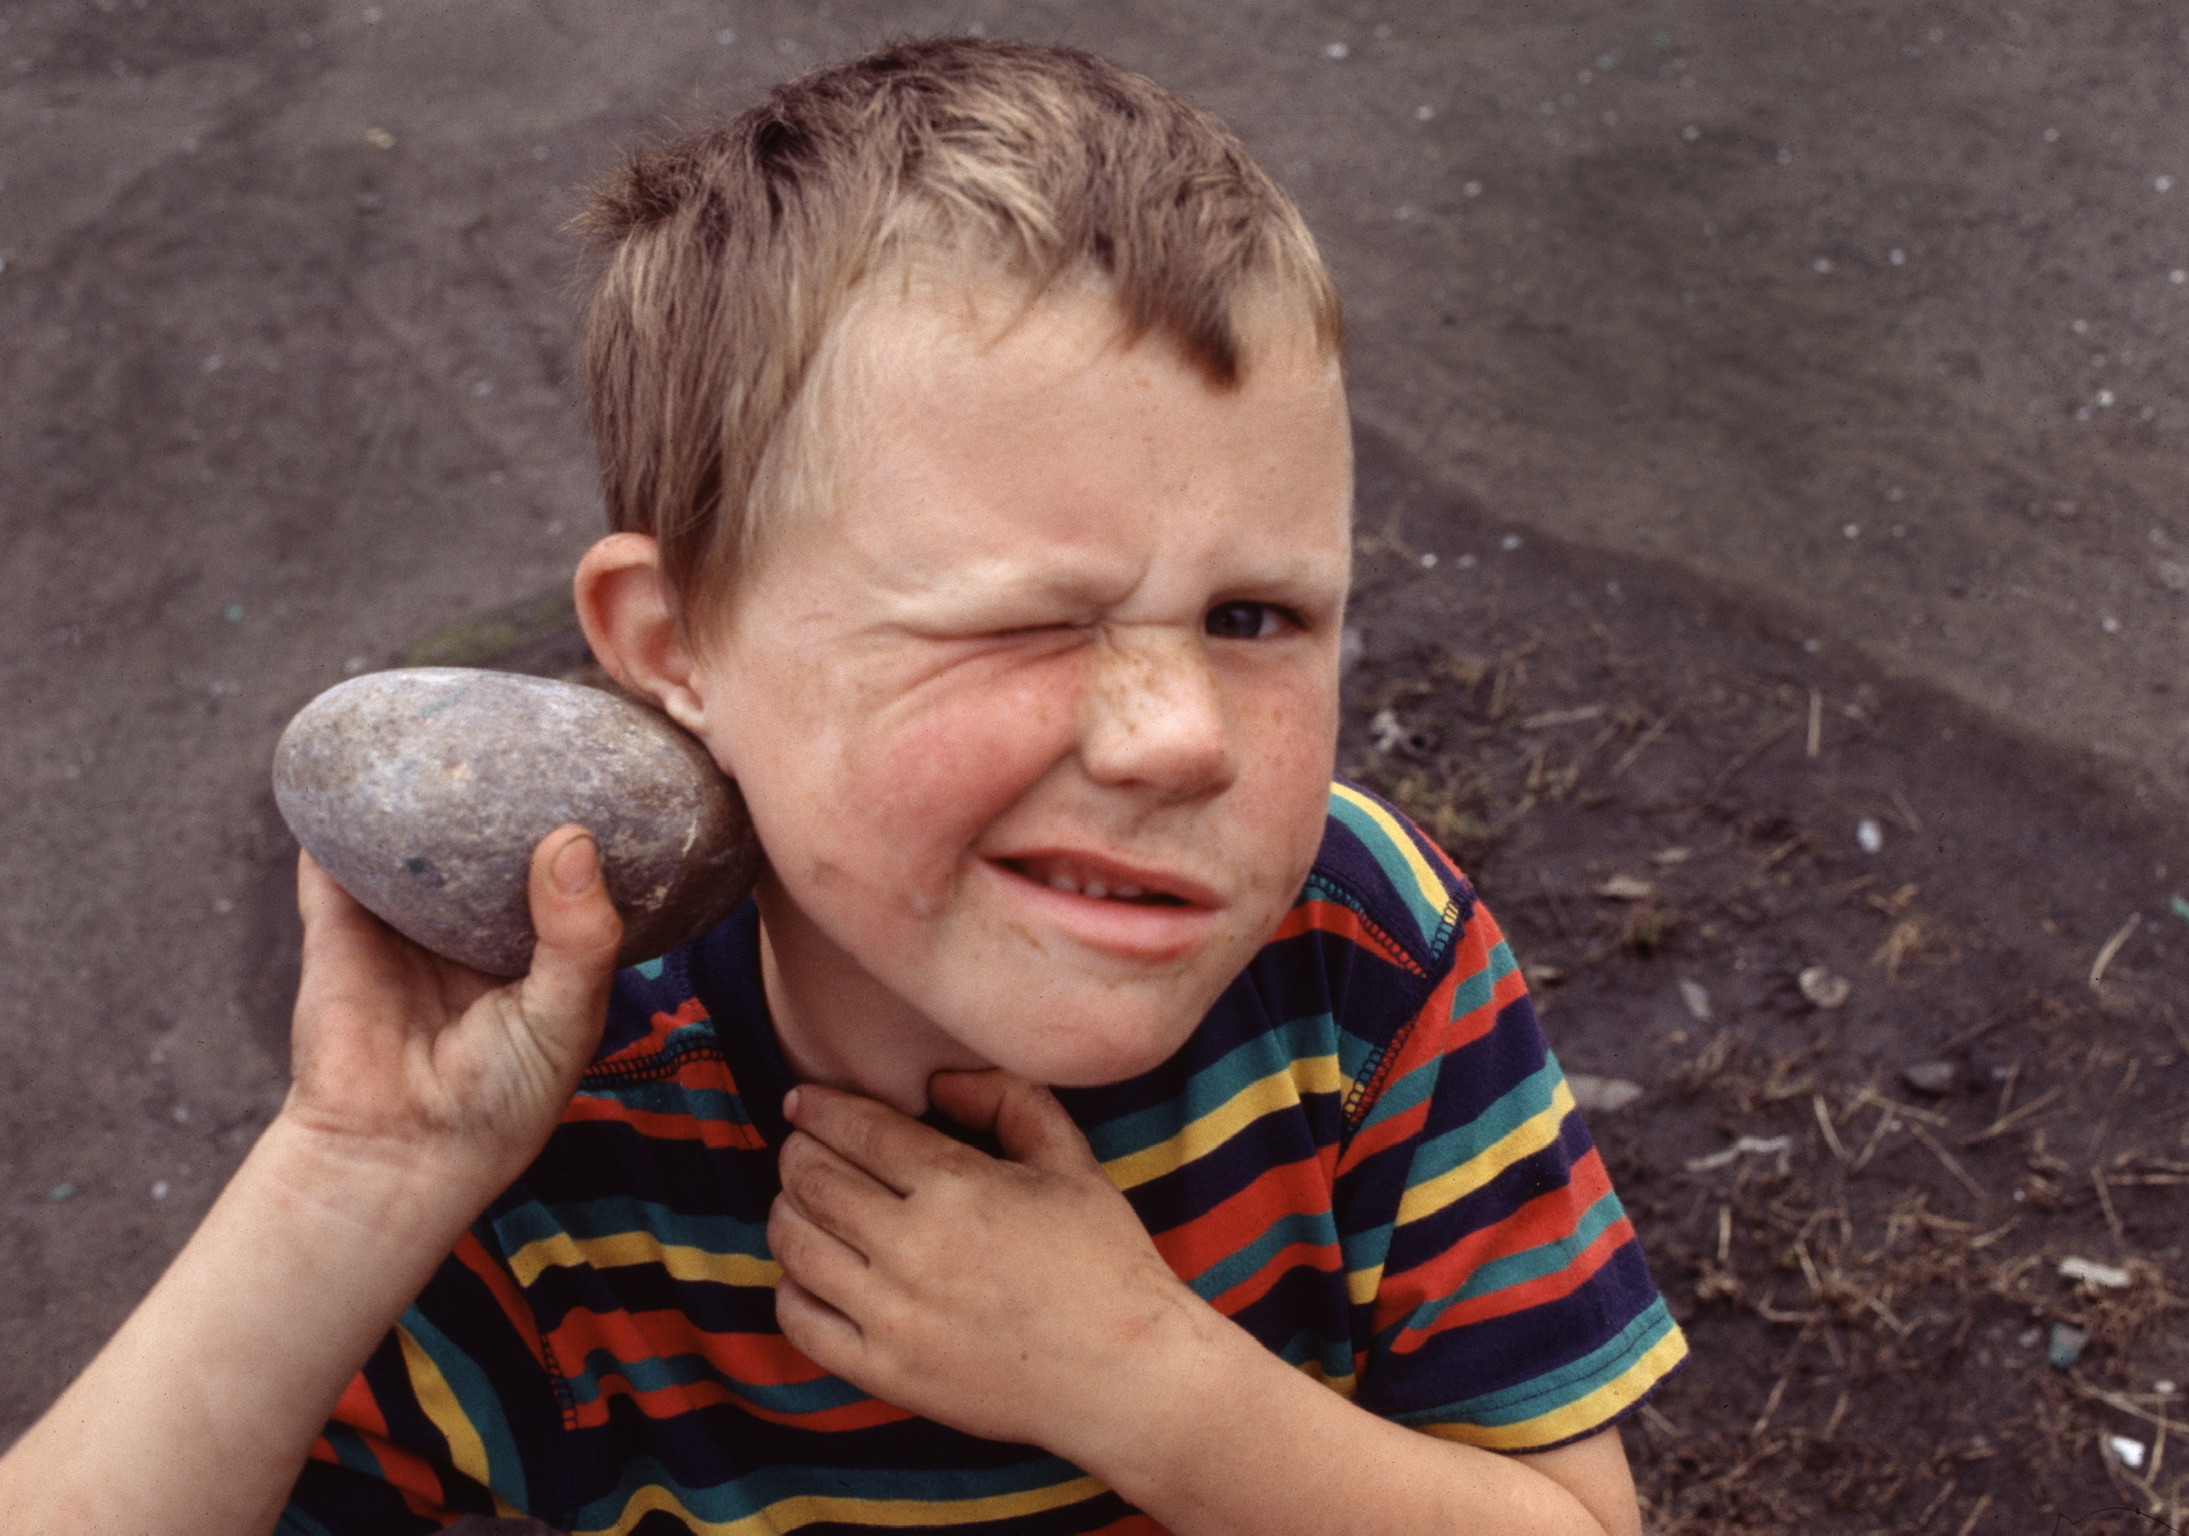 Color photograph by Barbara Beirne. High-angle shot looking down onto a young boy holding a rock in his left hand, close to his ear. His right eye is closed, and his mouth curled up to the side. He wears a striped T-shirt.